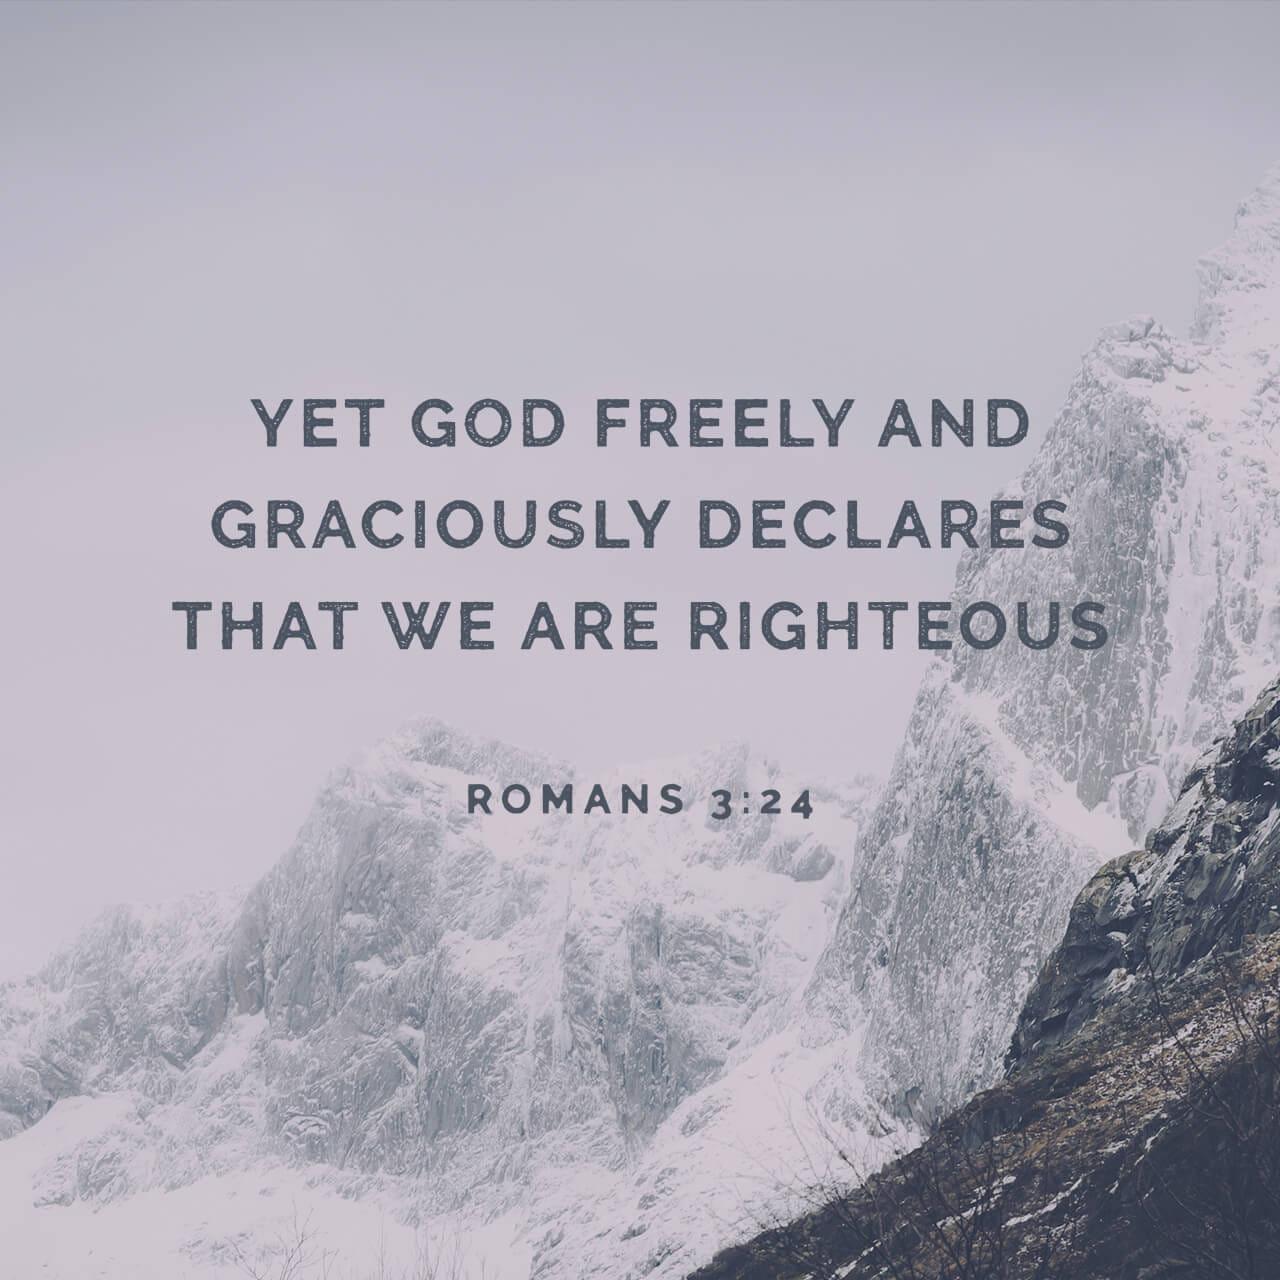 Bible Verse of the Day - day 159 - image 593 (Romans 3:23)